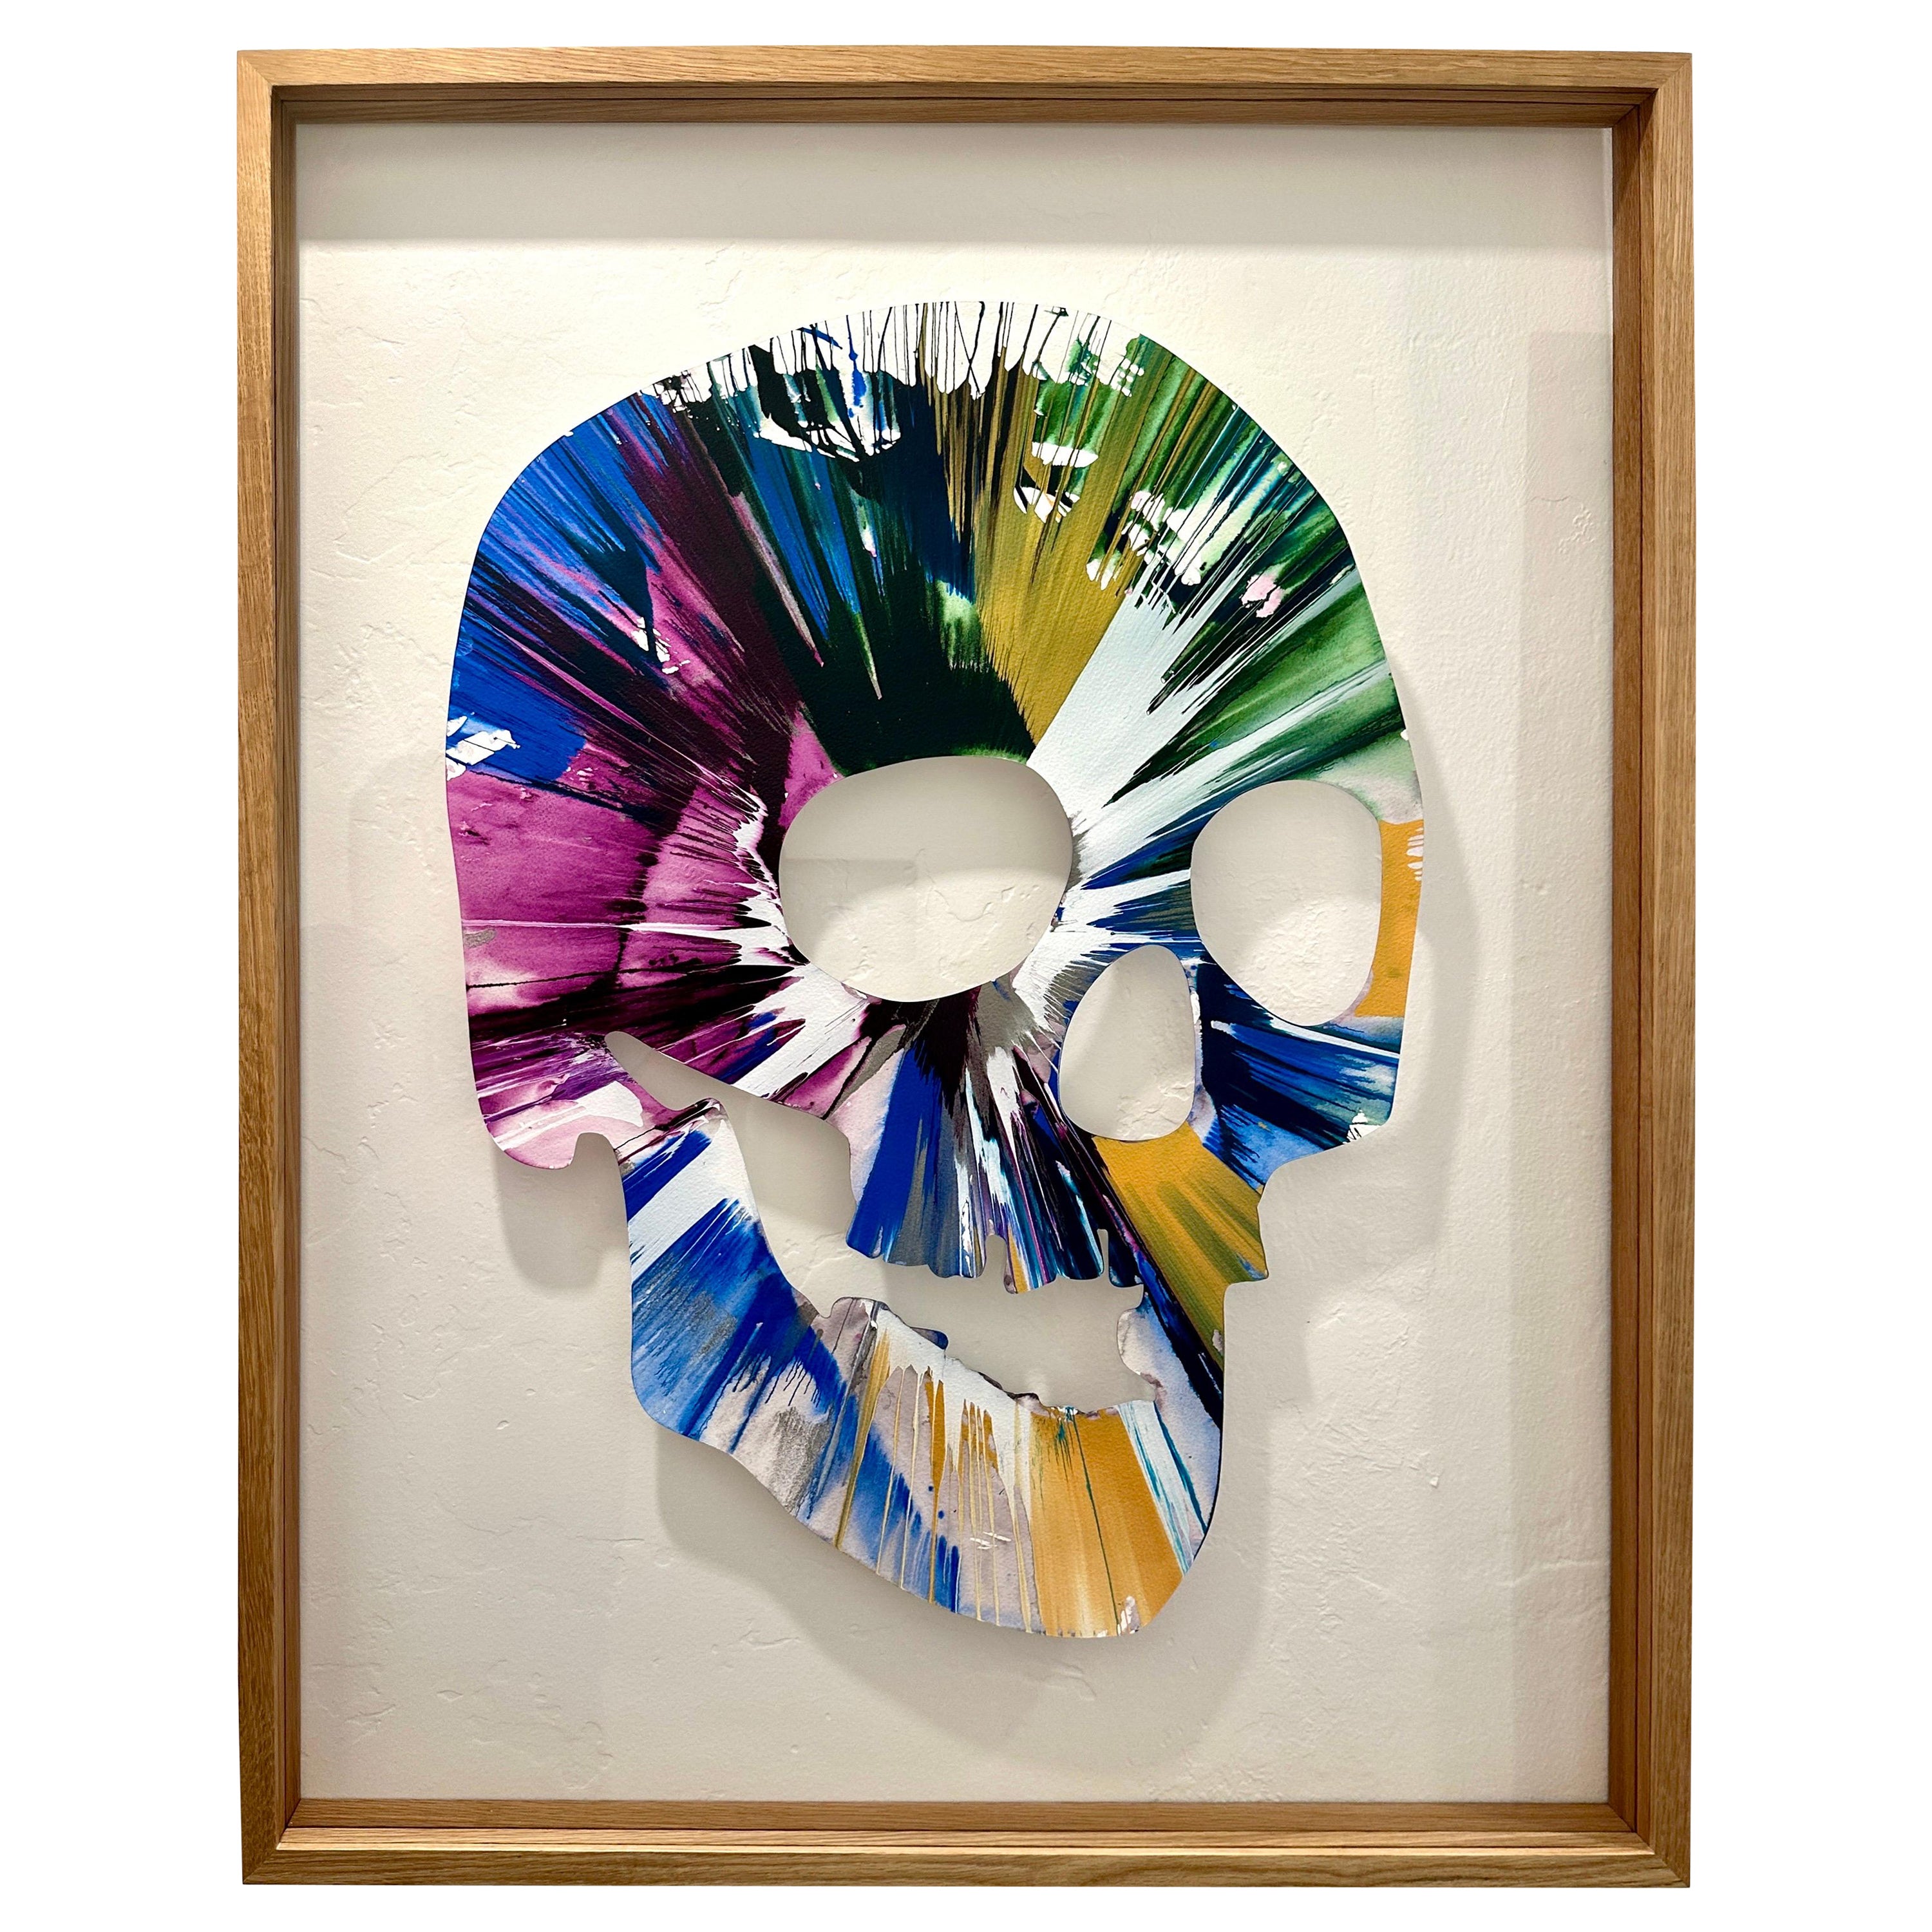 Damien Hirst Skull Spin Painting (Created at Damien Hirst Spin Workshop), 2009 For Sale